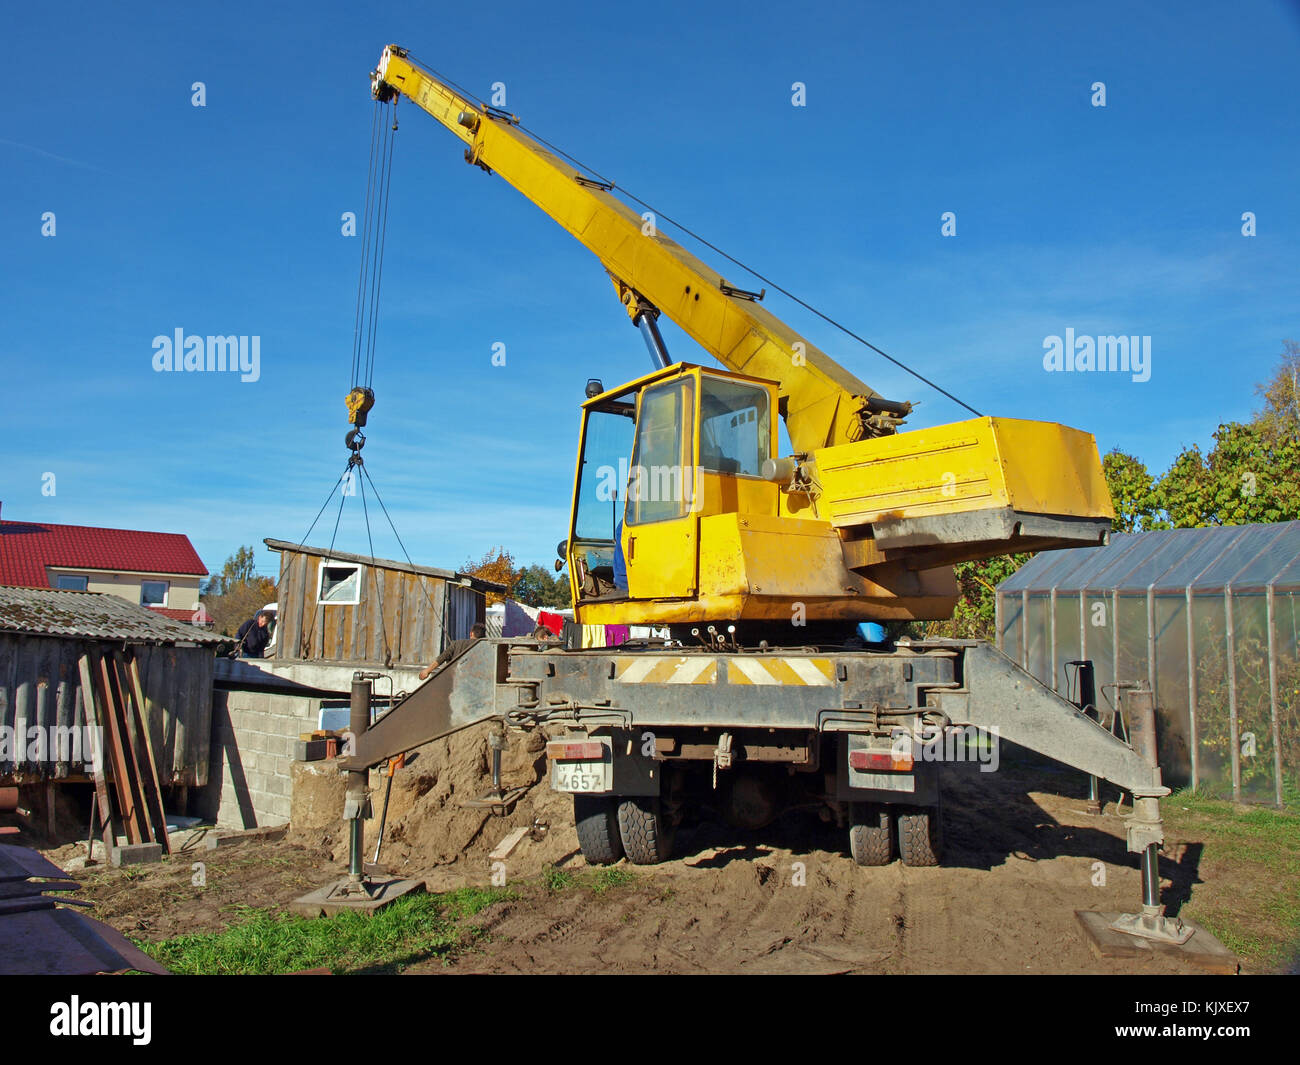 NICA, LATVIA - OCTOBER 12, 2013: Mobile crane mounted on russian truck ZIL is working to cover the new cellar with concrete panels. Stock Photo